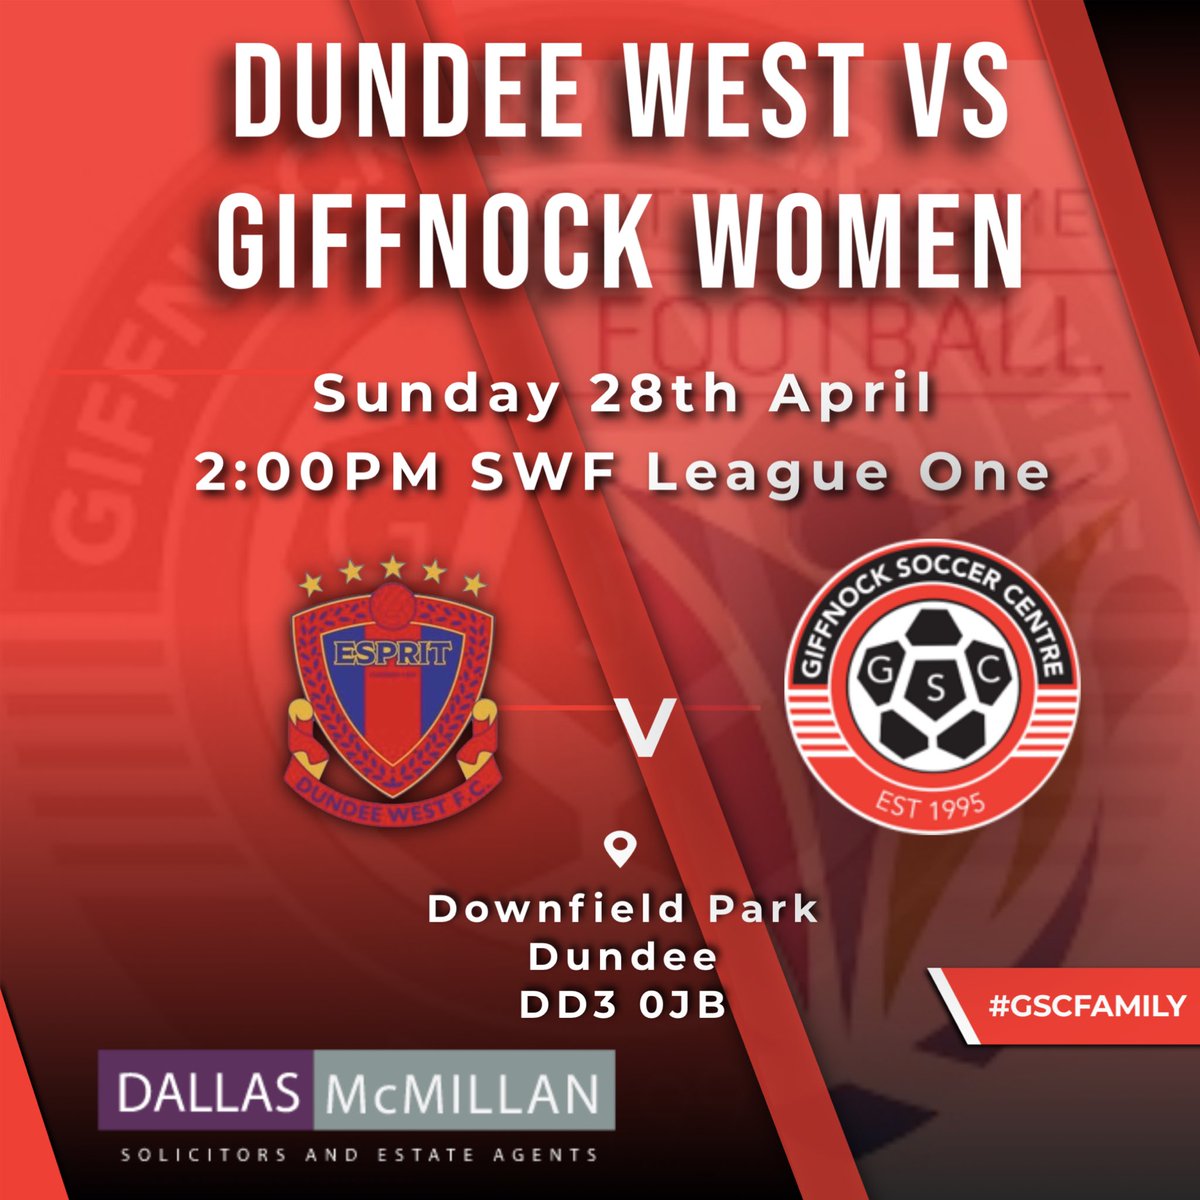 League action returns🙌 Join us in our penultimate league game of the season, as we travel to Dundee to face @DundeeWestGWFC. #SWFLeagueOne #GSCWomen